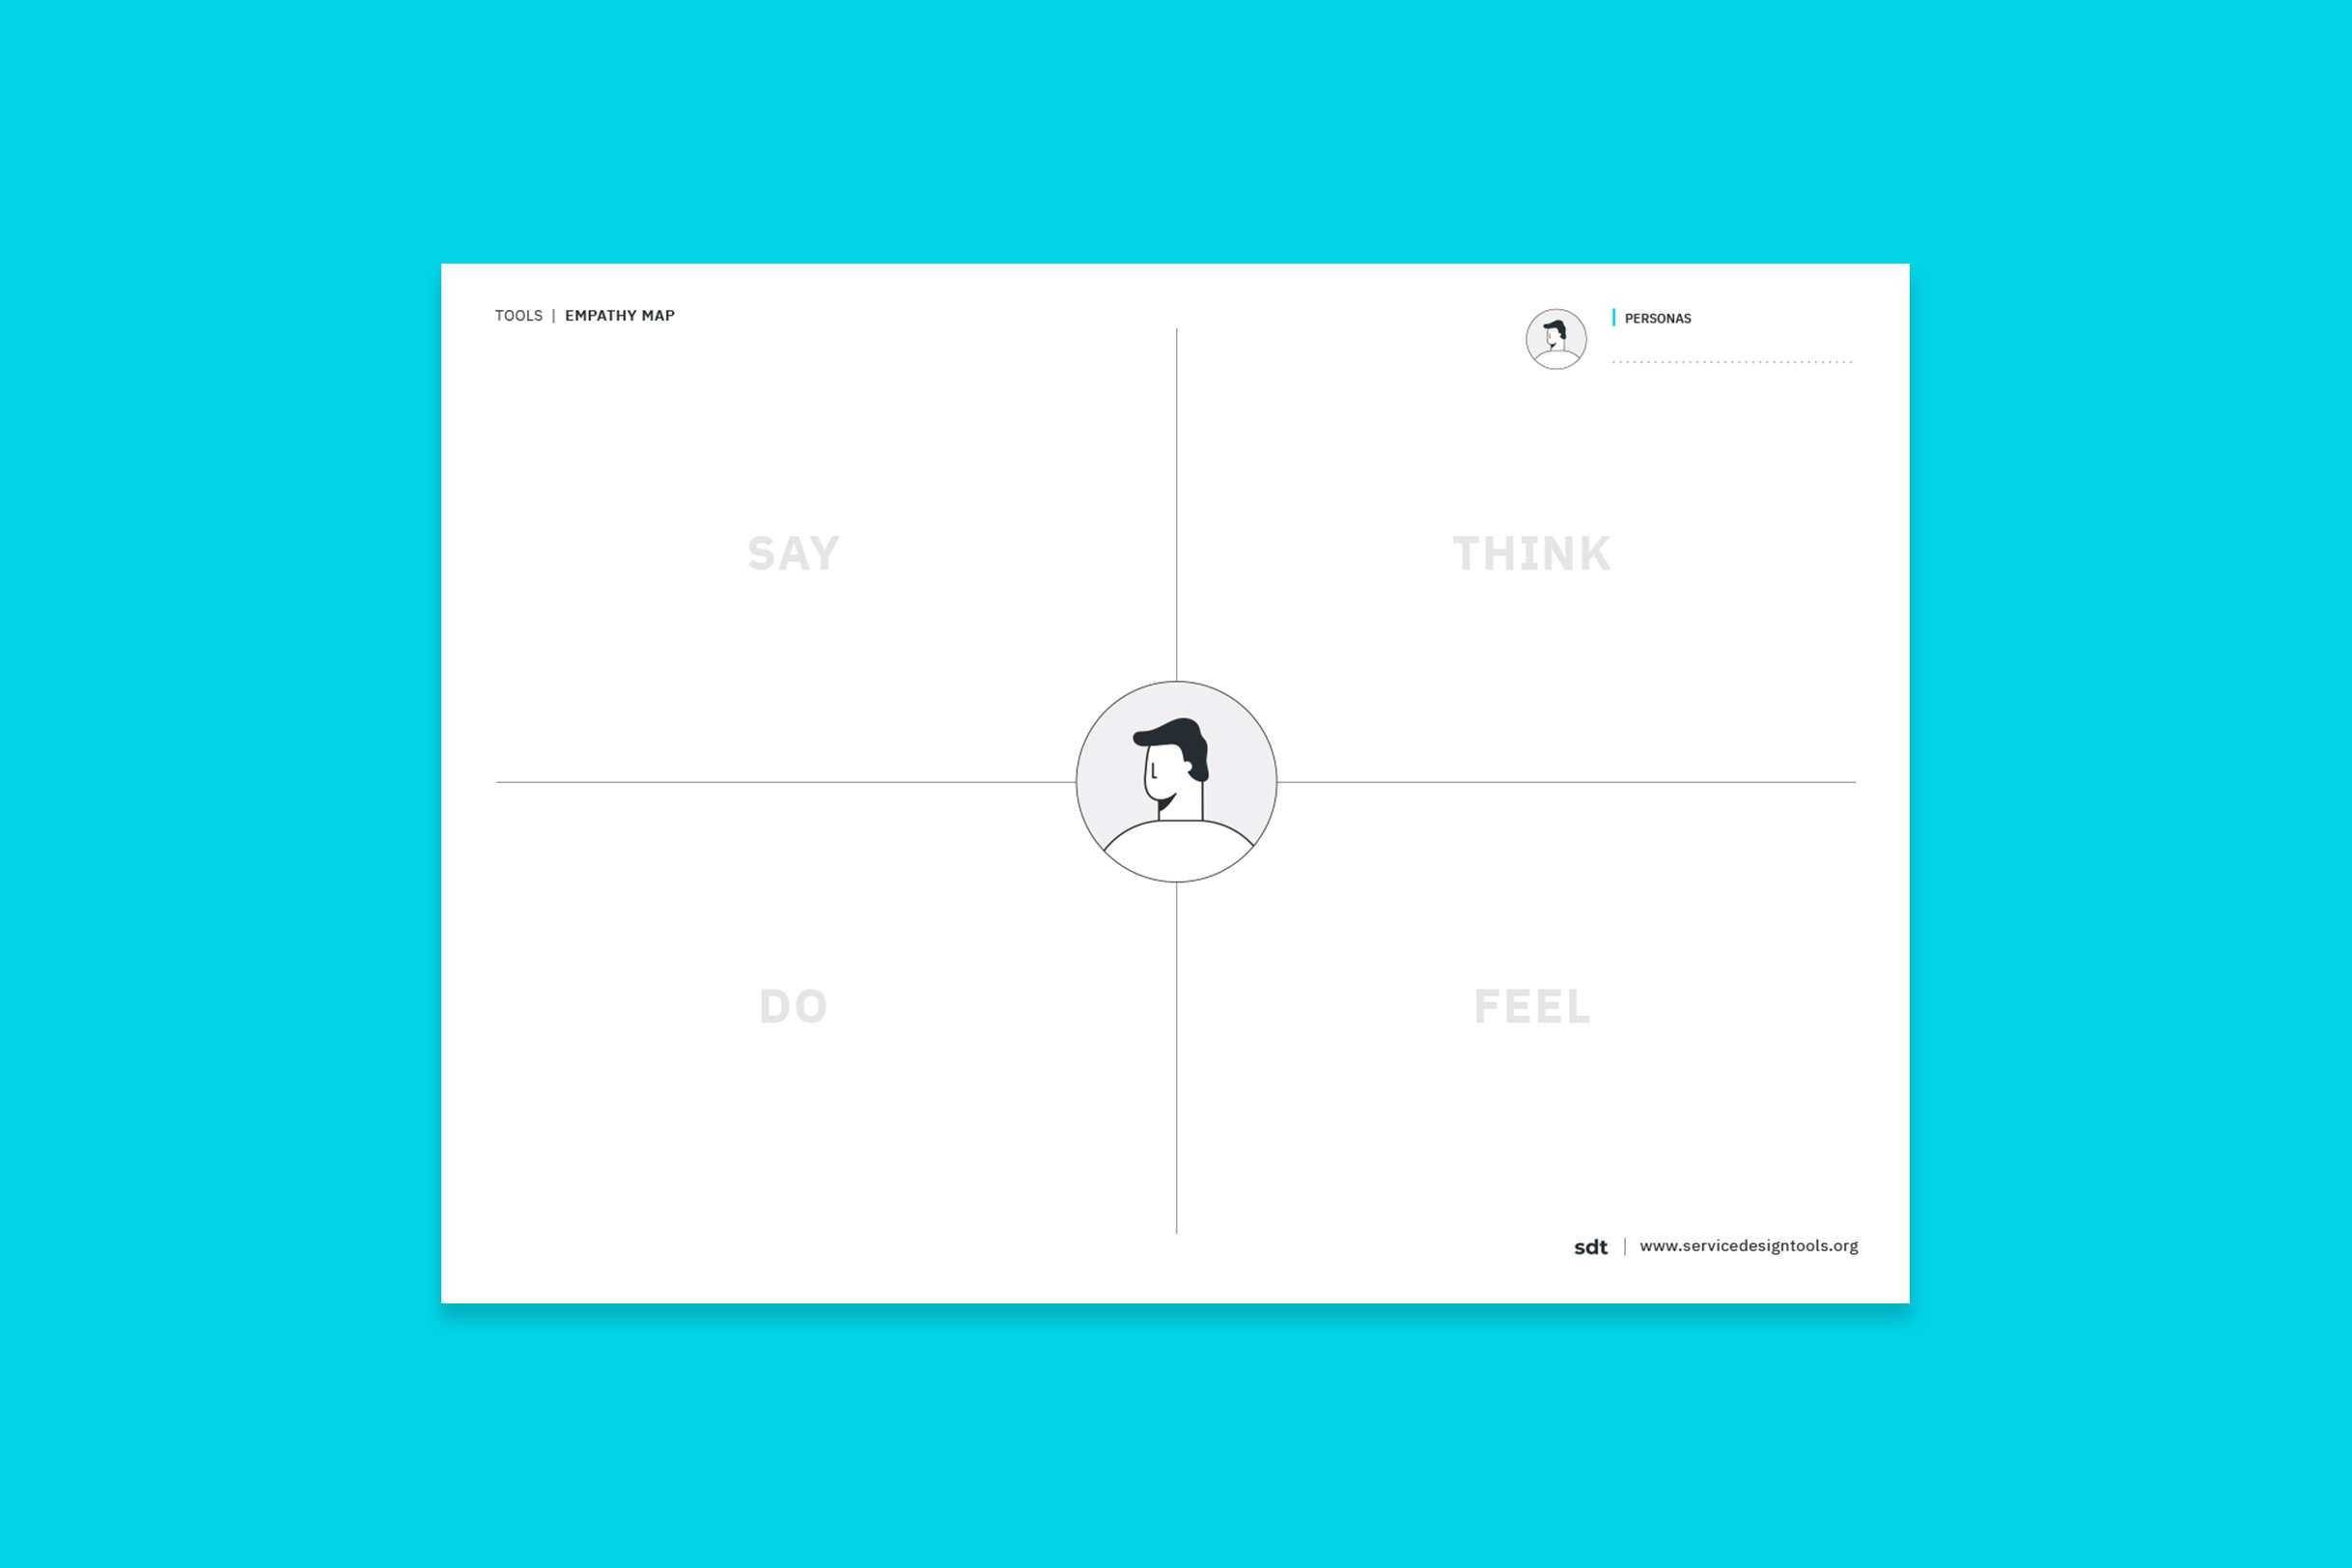 Preview image of the template for Empathy Map